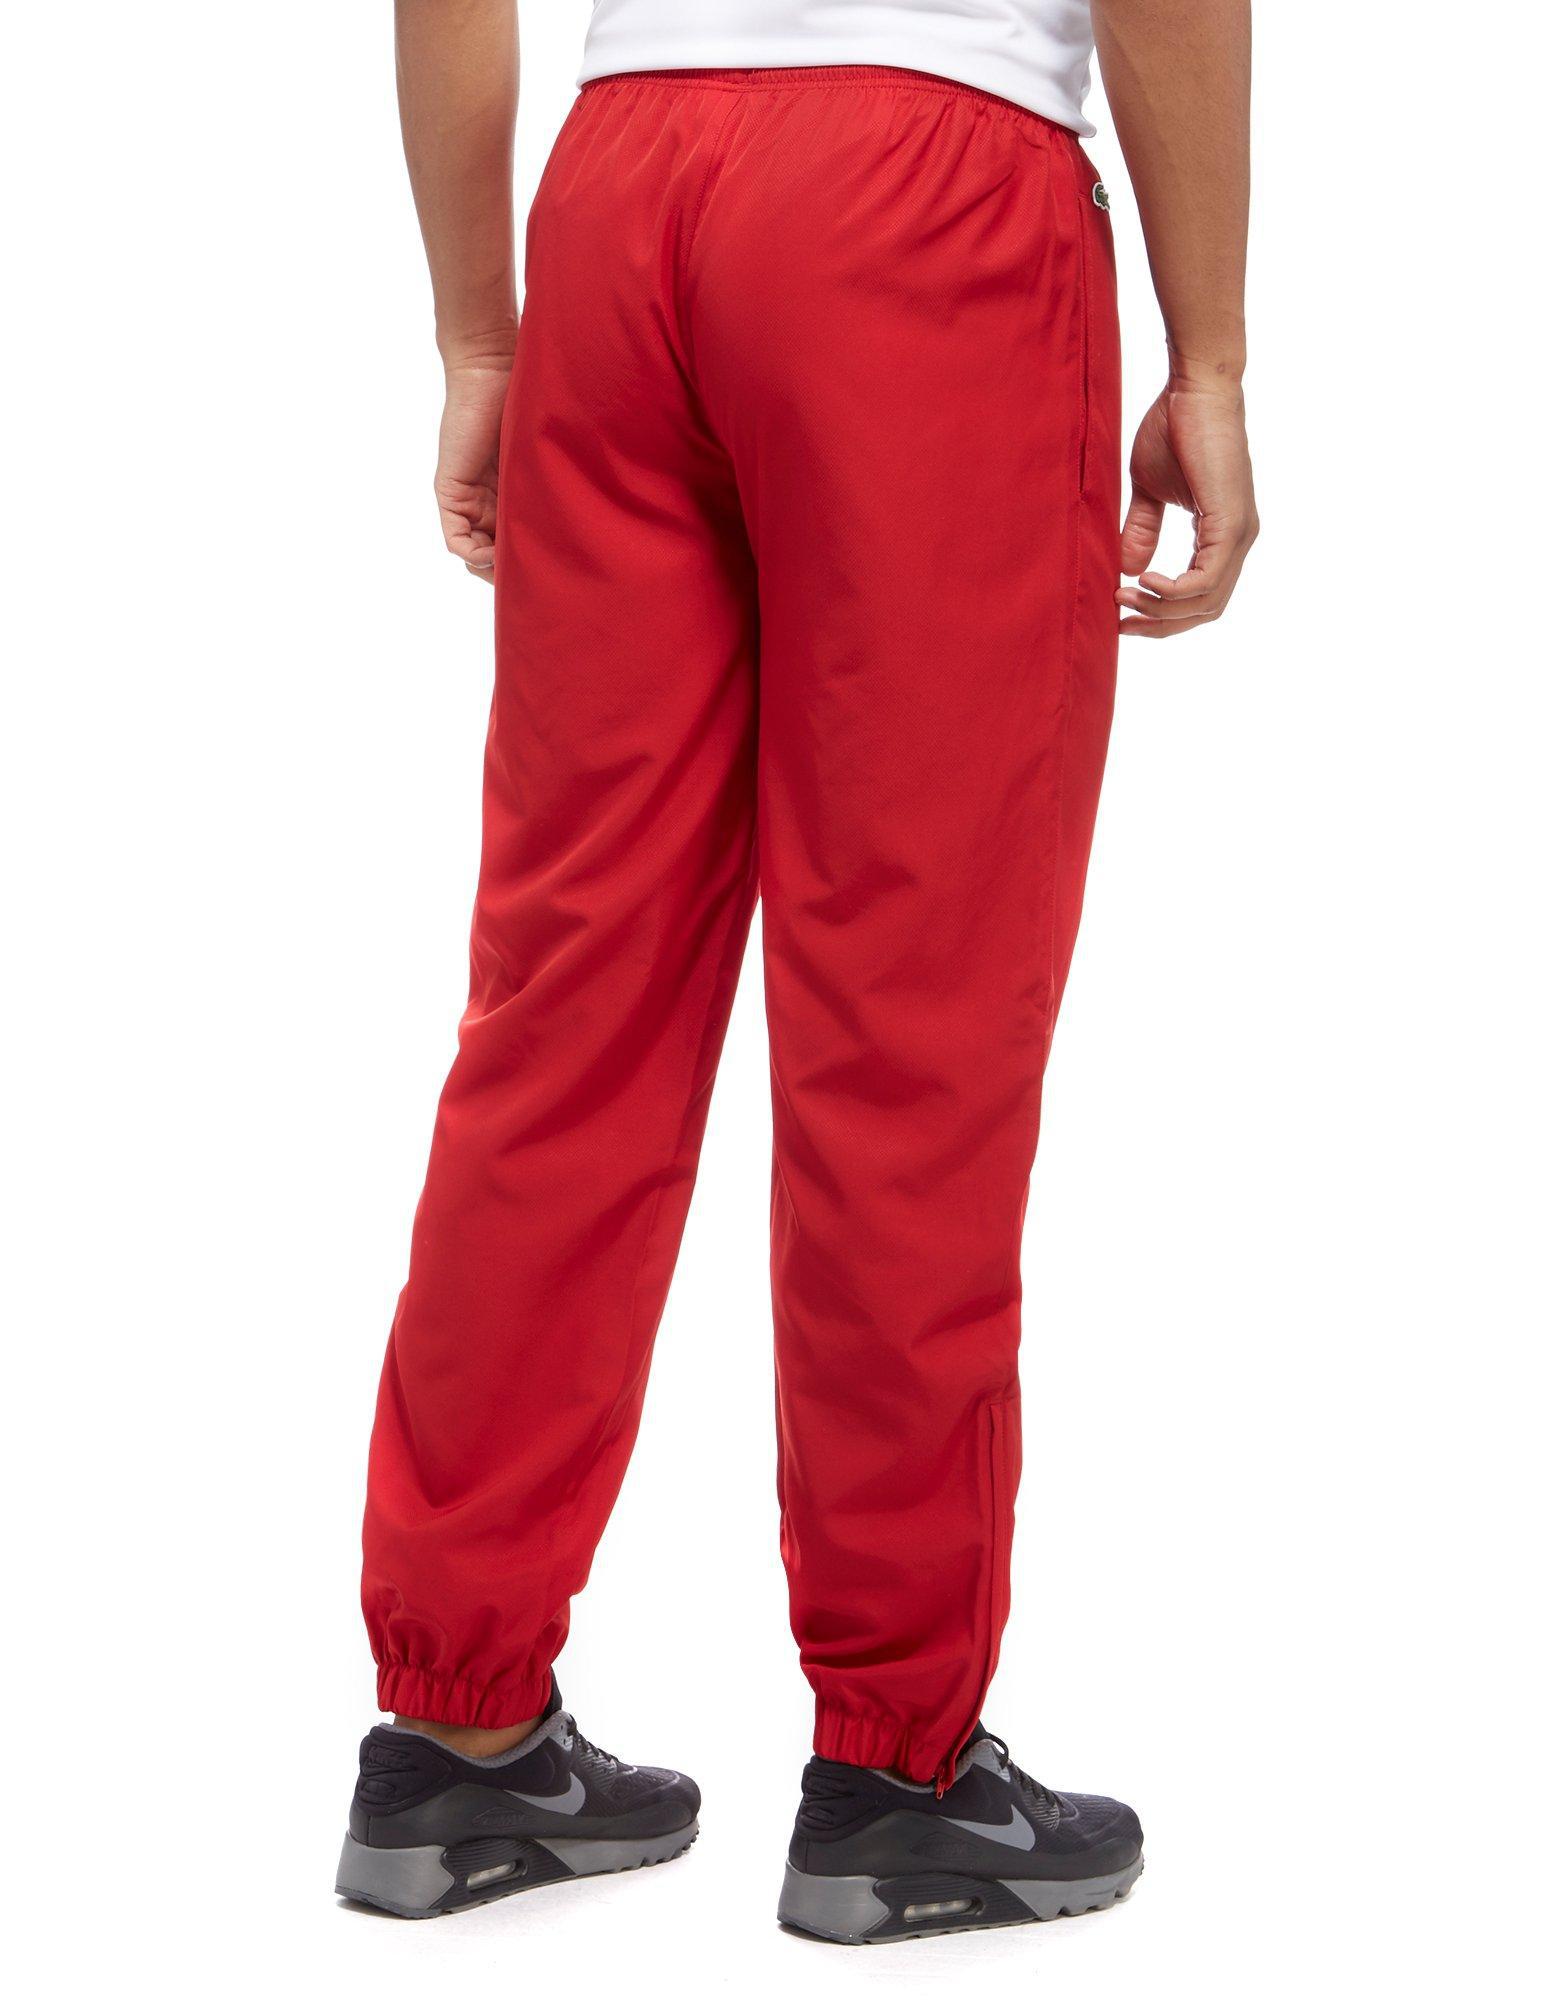 red lacoste track pants